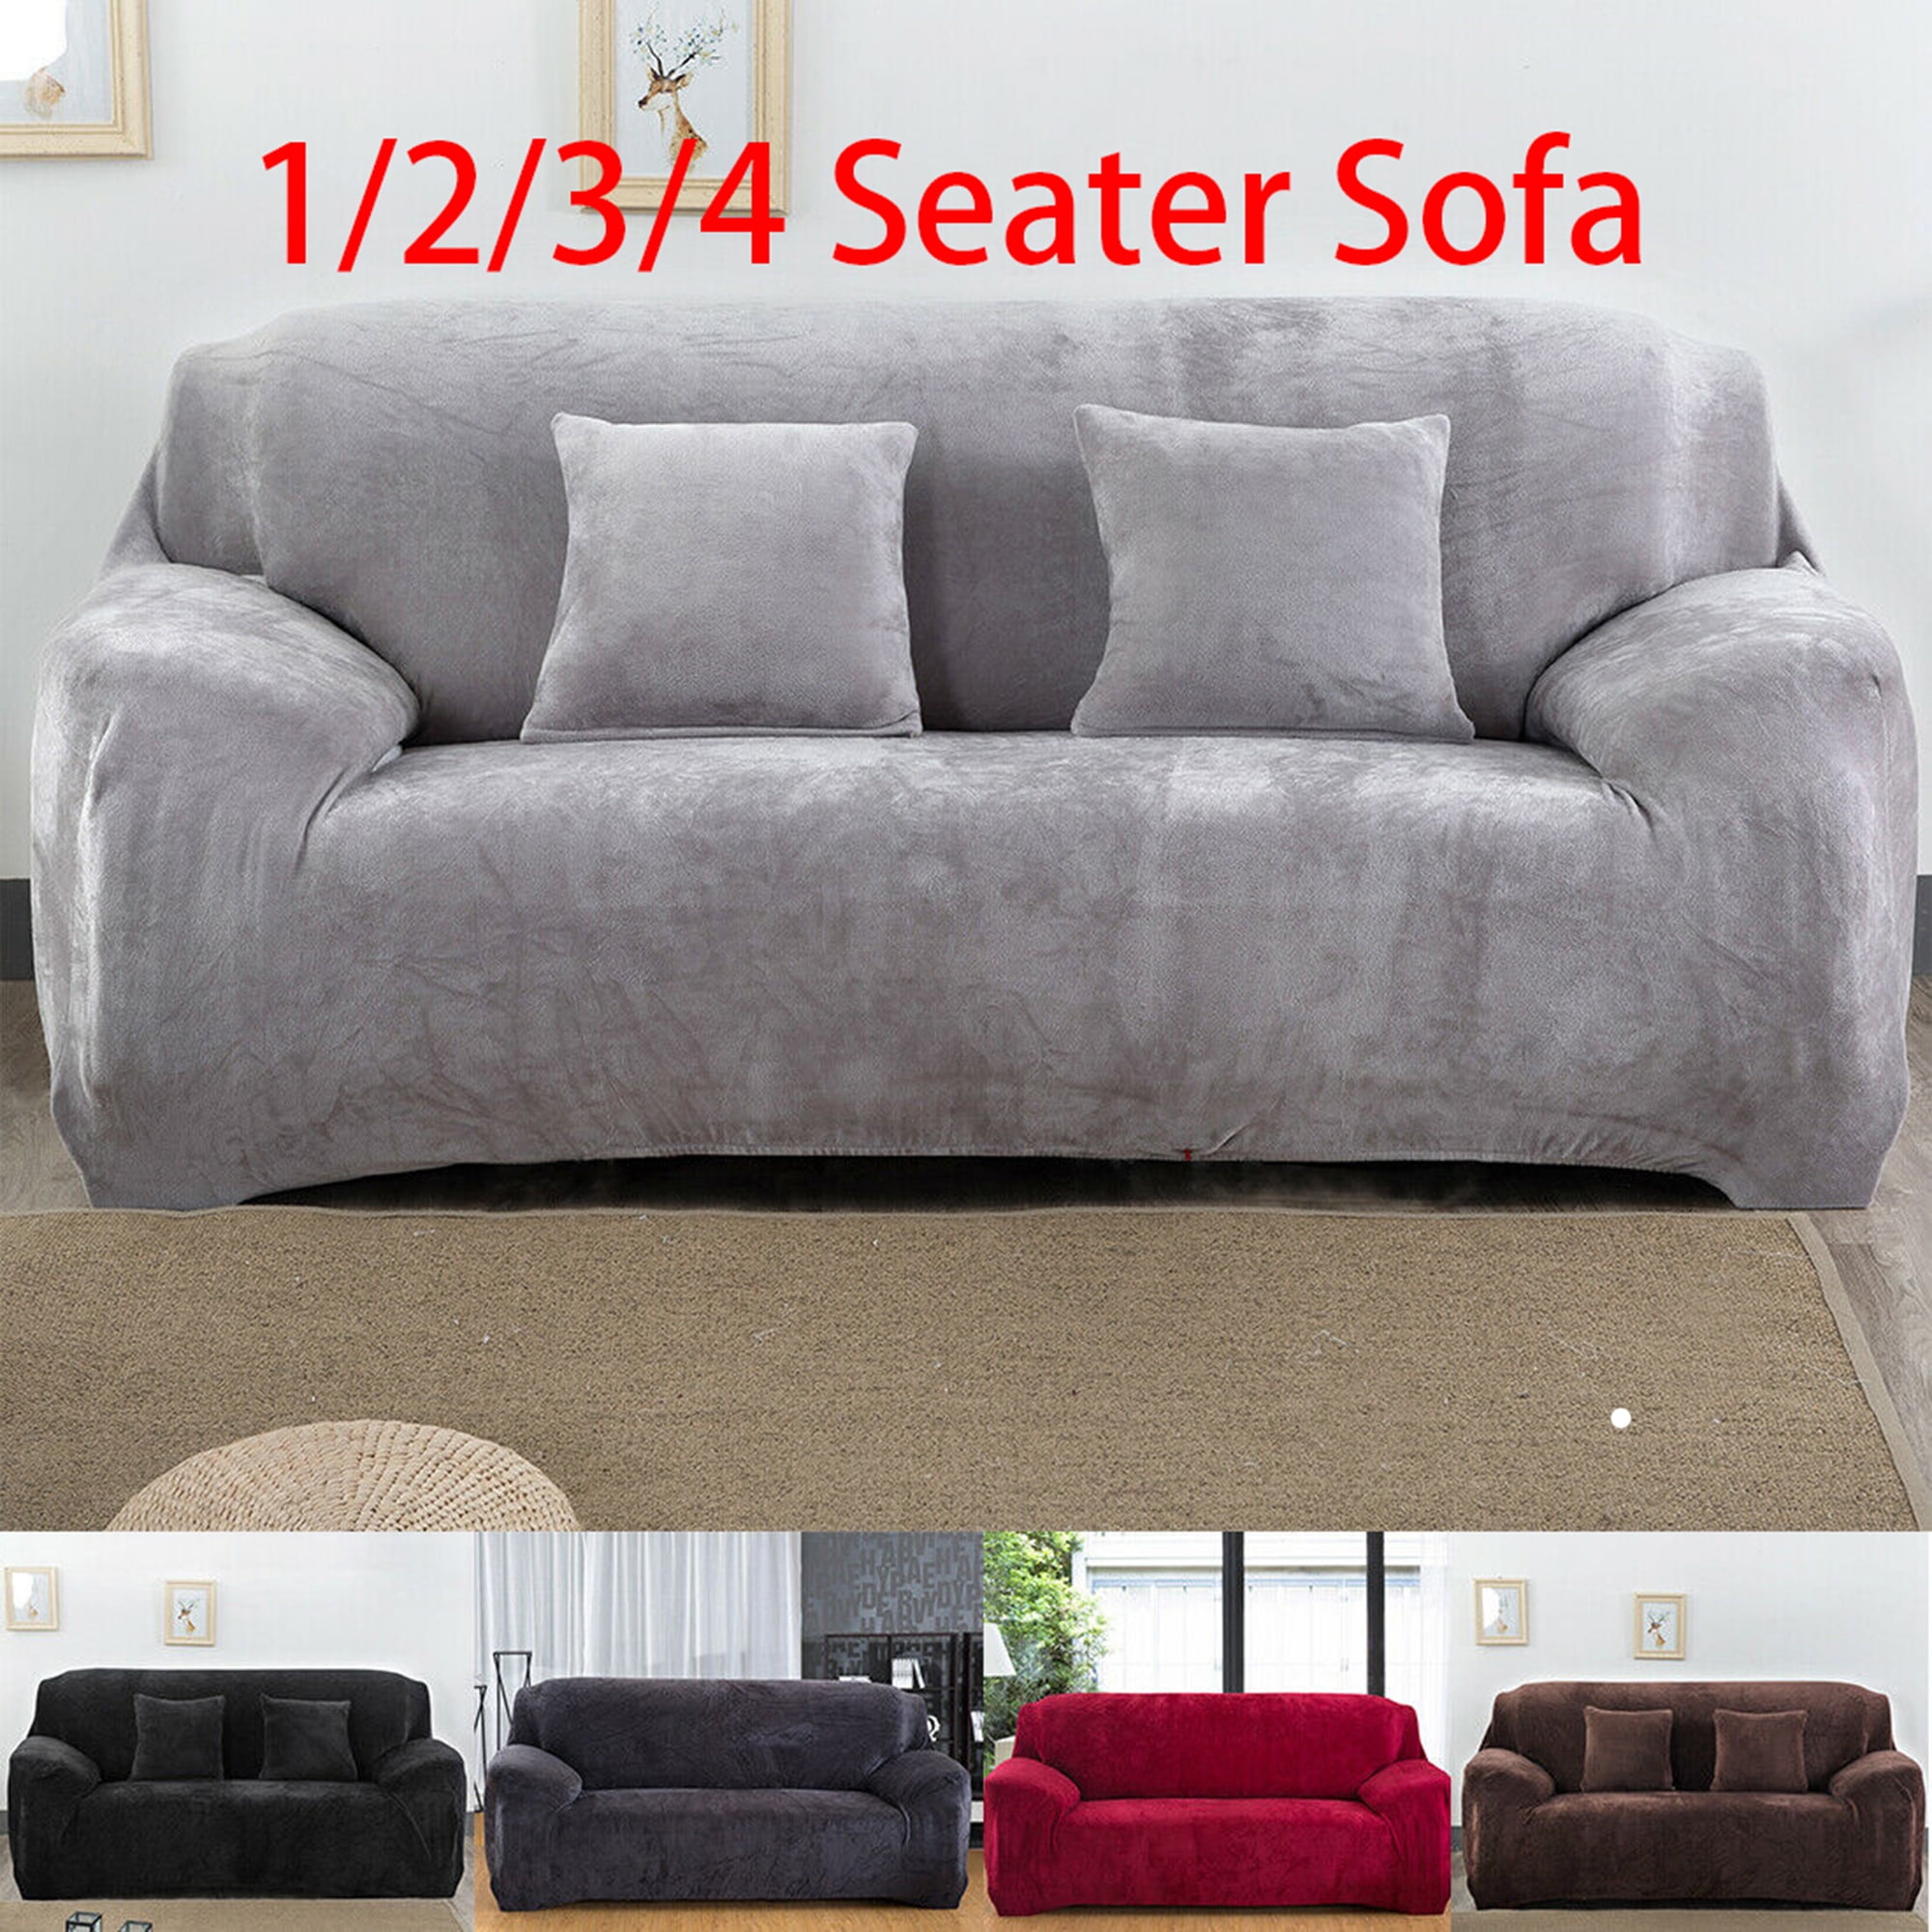 Details about   Sofa Cover Protector Soft Stretch Slipcover Furniture Accessory Living Room Dec. 